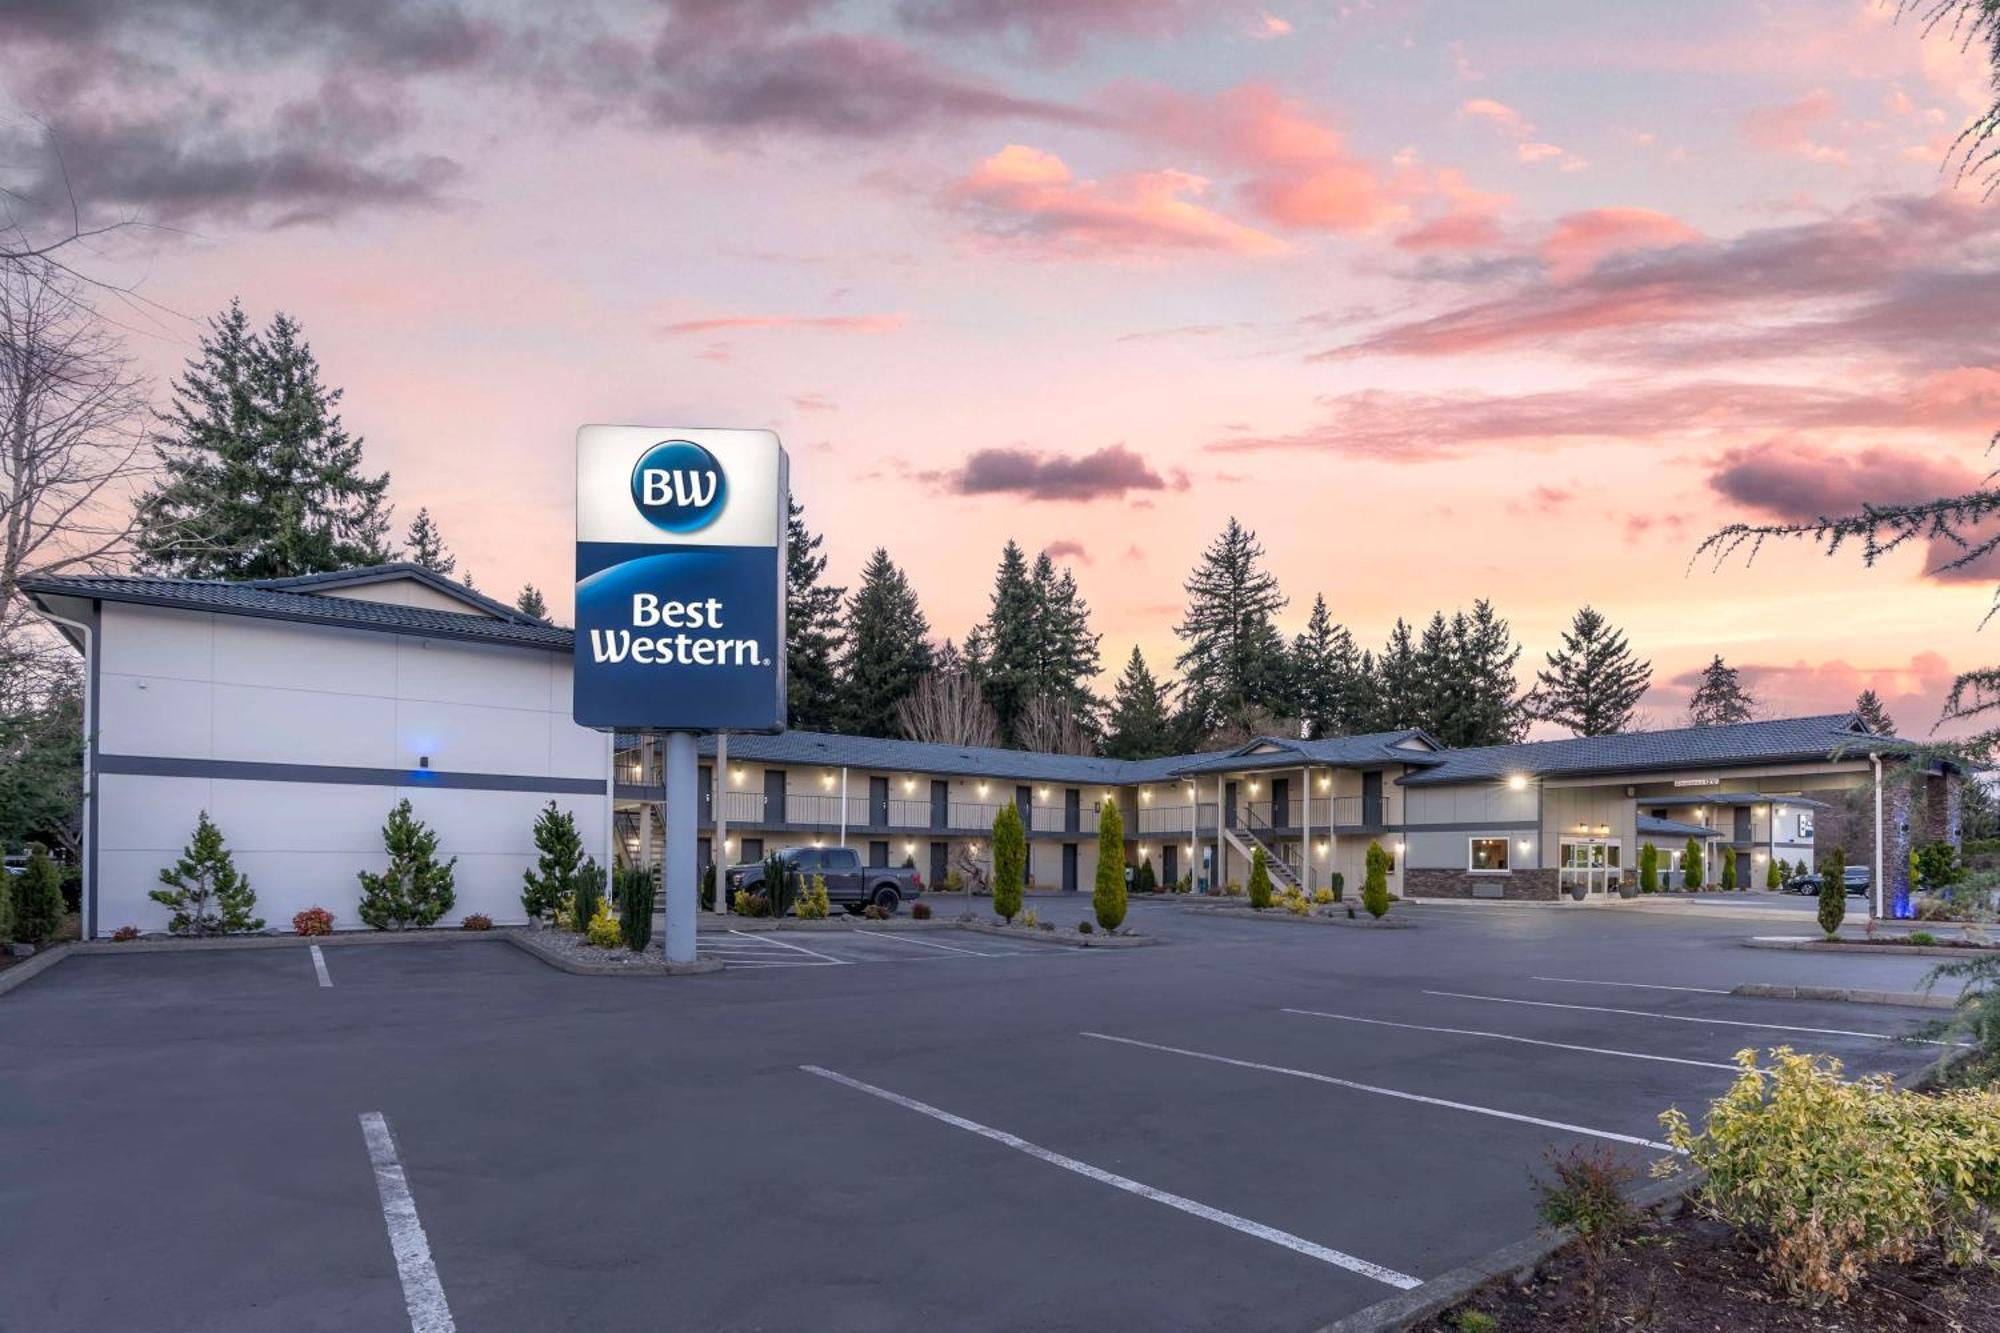 Best Western Inn Of Vancouver Exterior photo